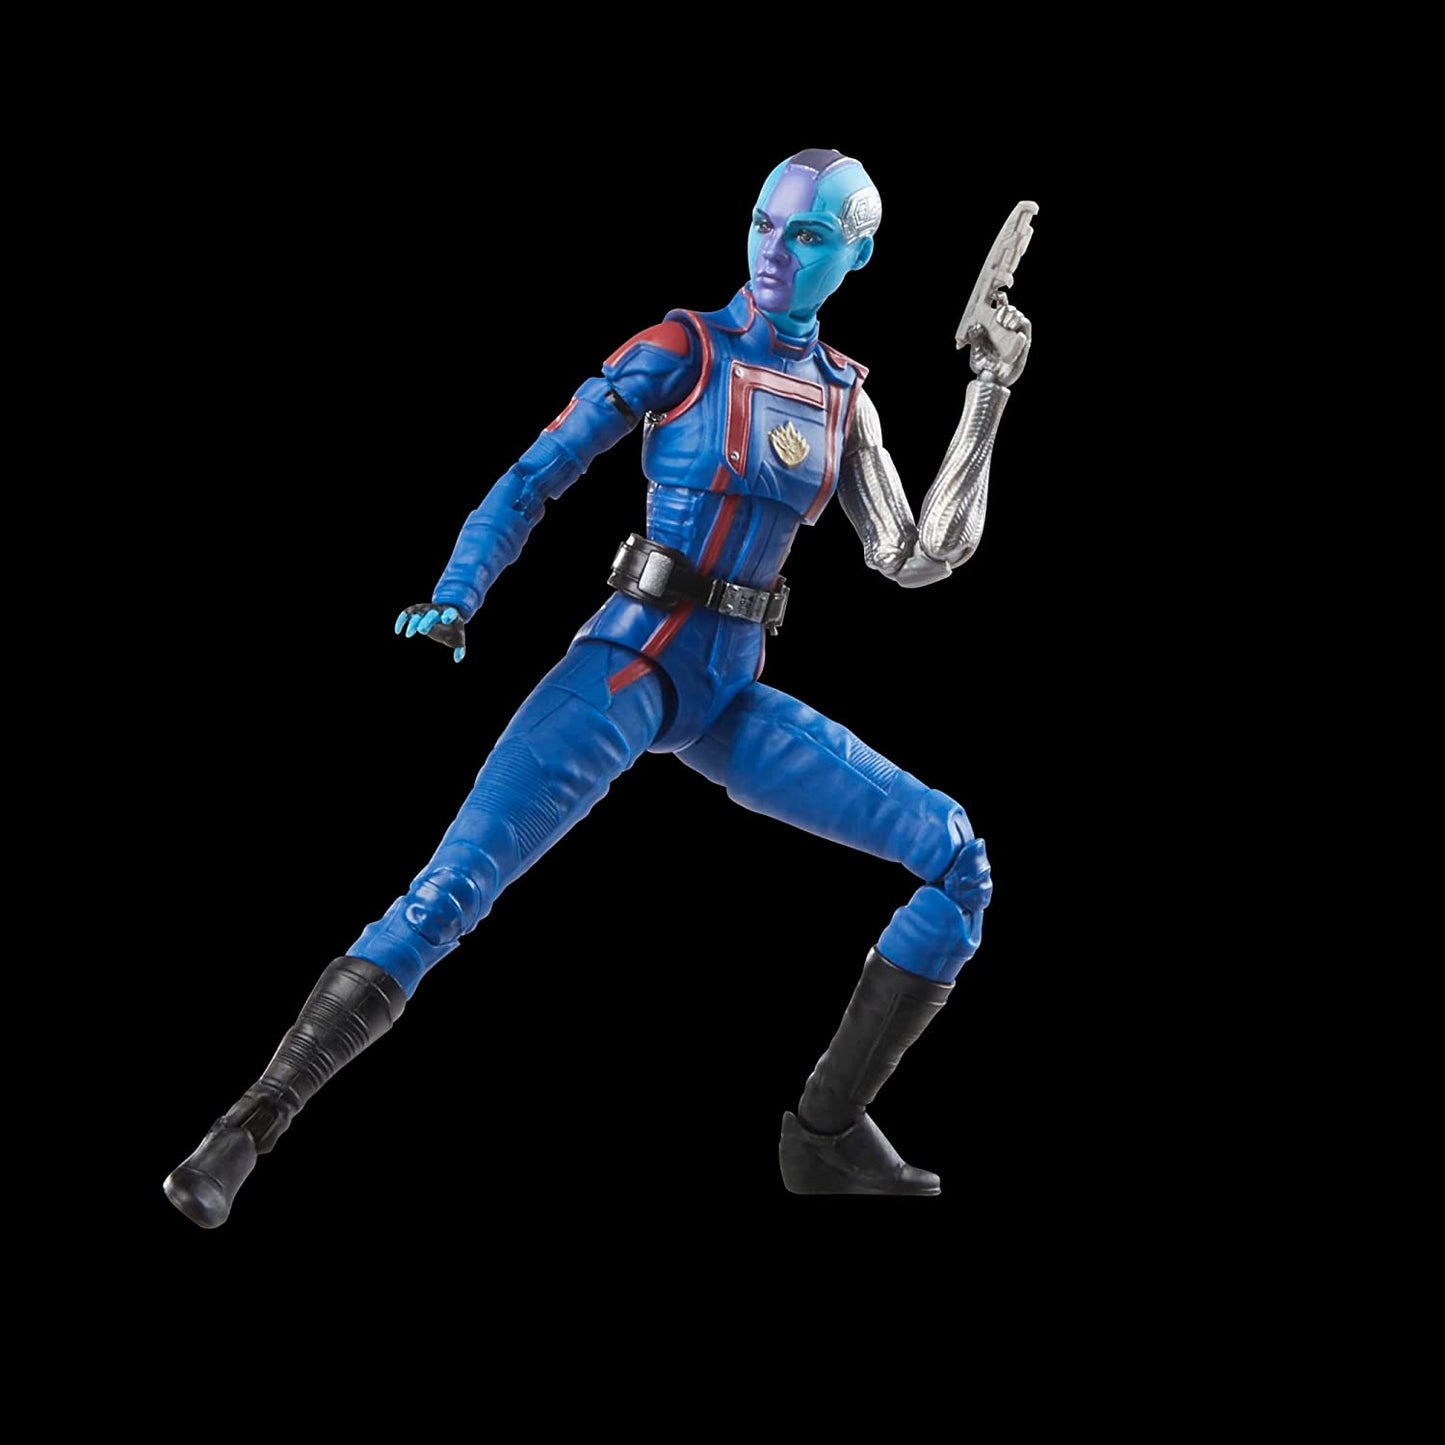  Guardians of the Galaxy Vol. 3 Marvel Legends Nebula 6-Inch Action Figure Toy another pose with the weapon - Heretoserveyou